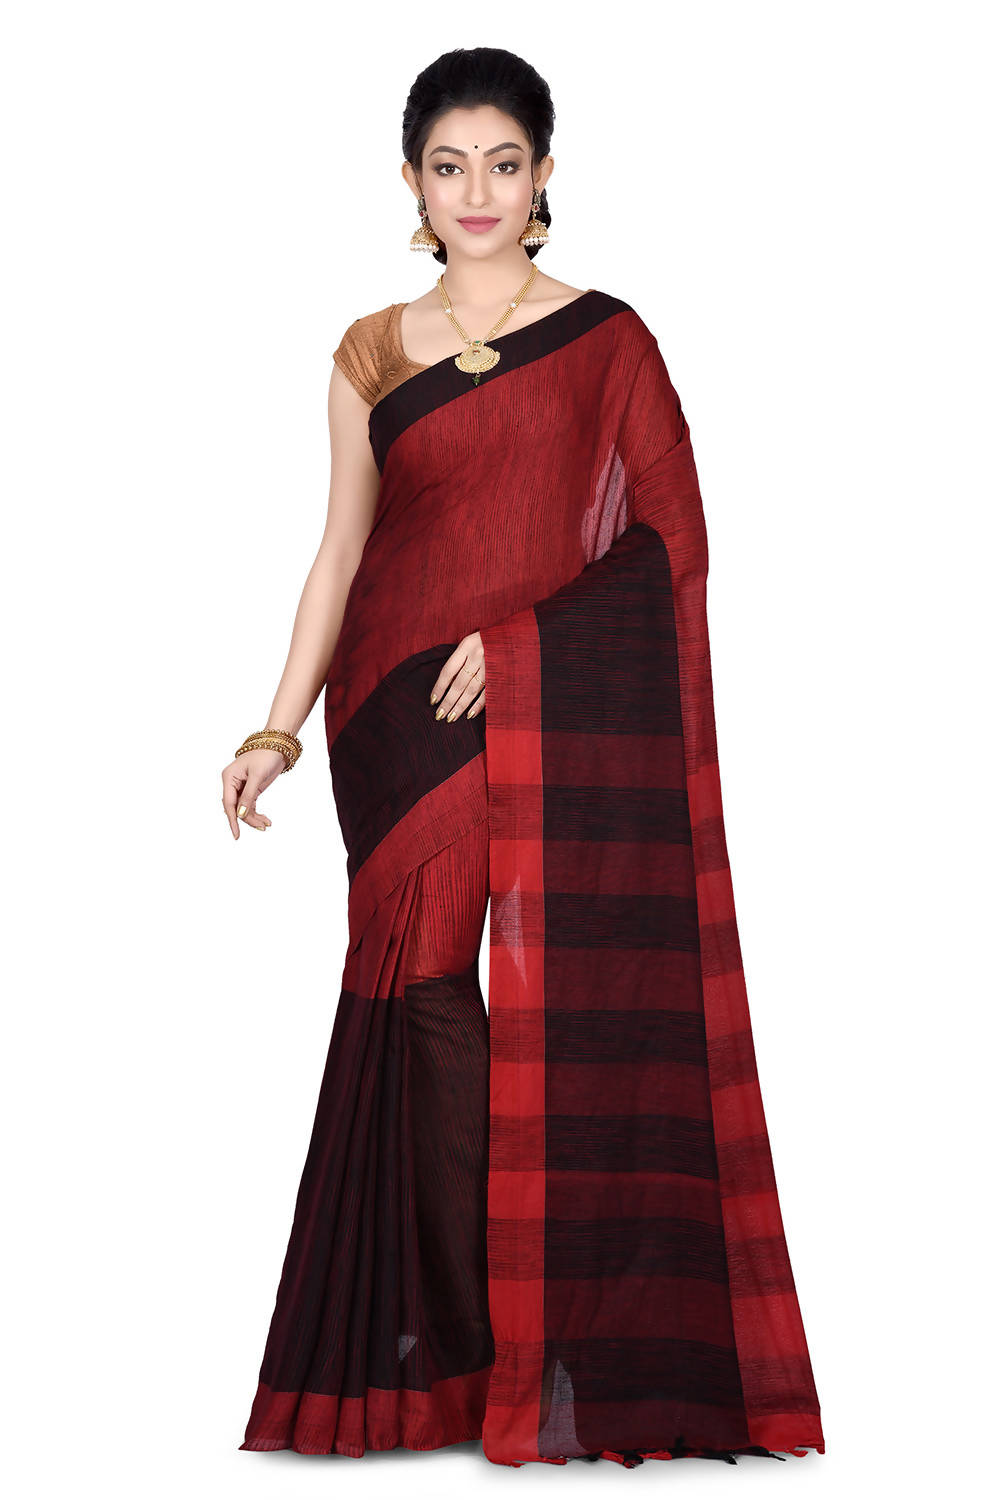 Handwoven Red and Black Cotton Saree